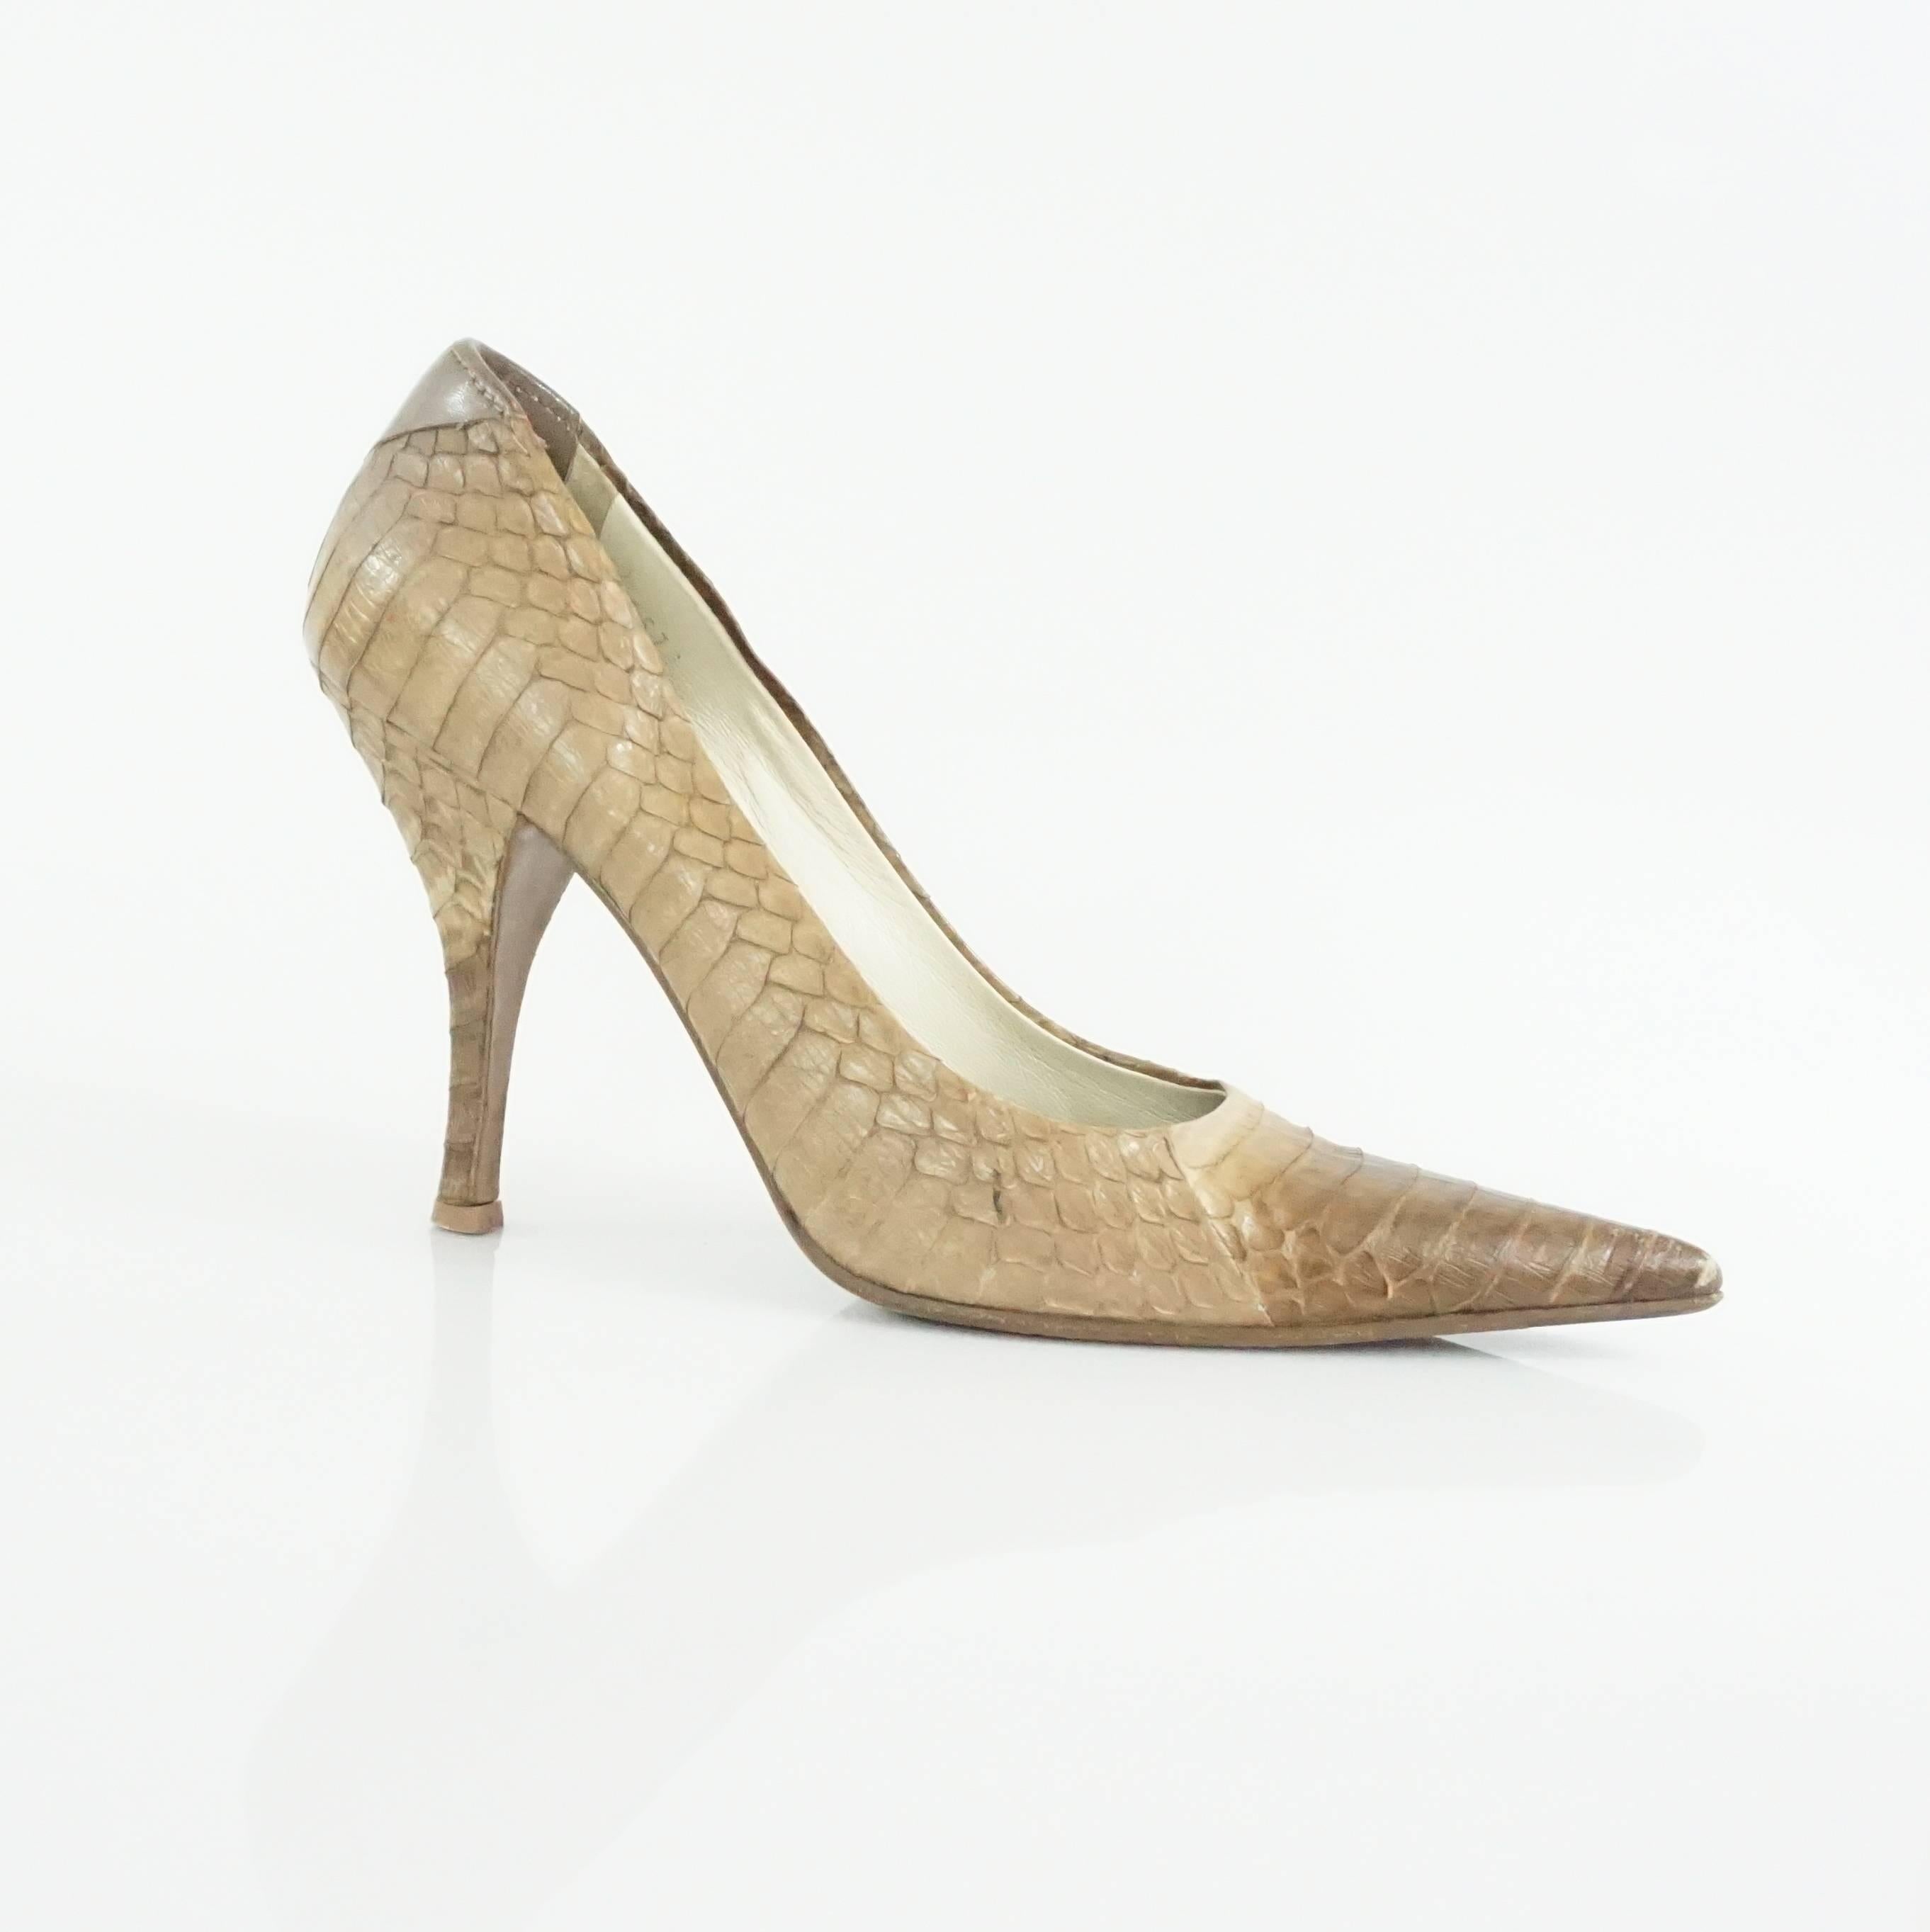 These Prada pumps have a pointed toe. They are beige python and have a heel. These pumps are in very good condition with minor overall wear.

Heel Height: about 4"